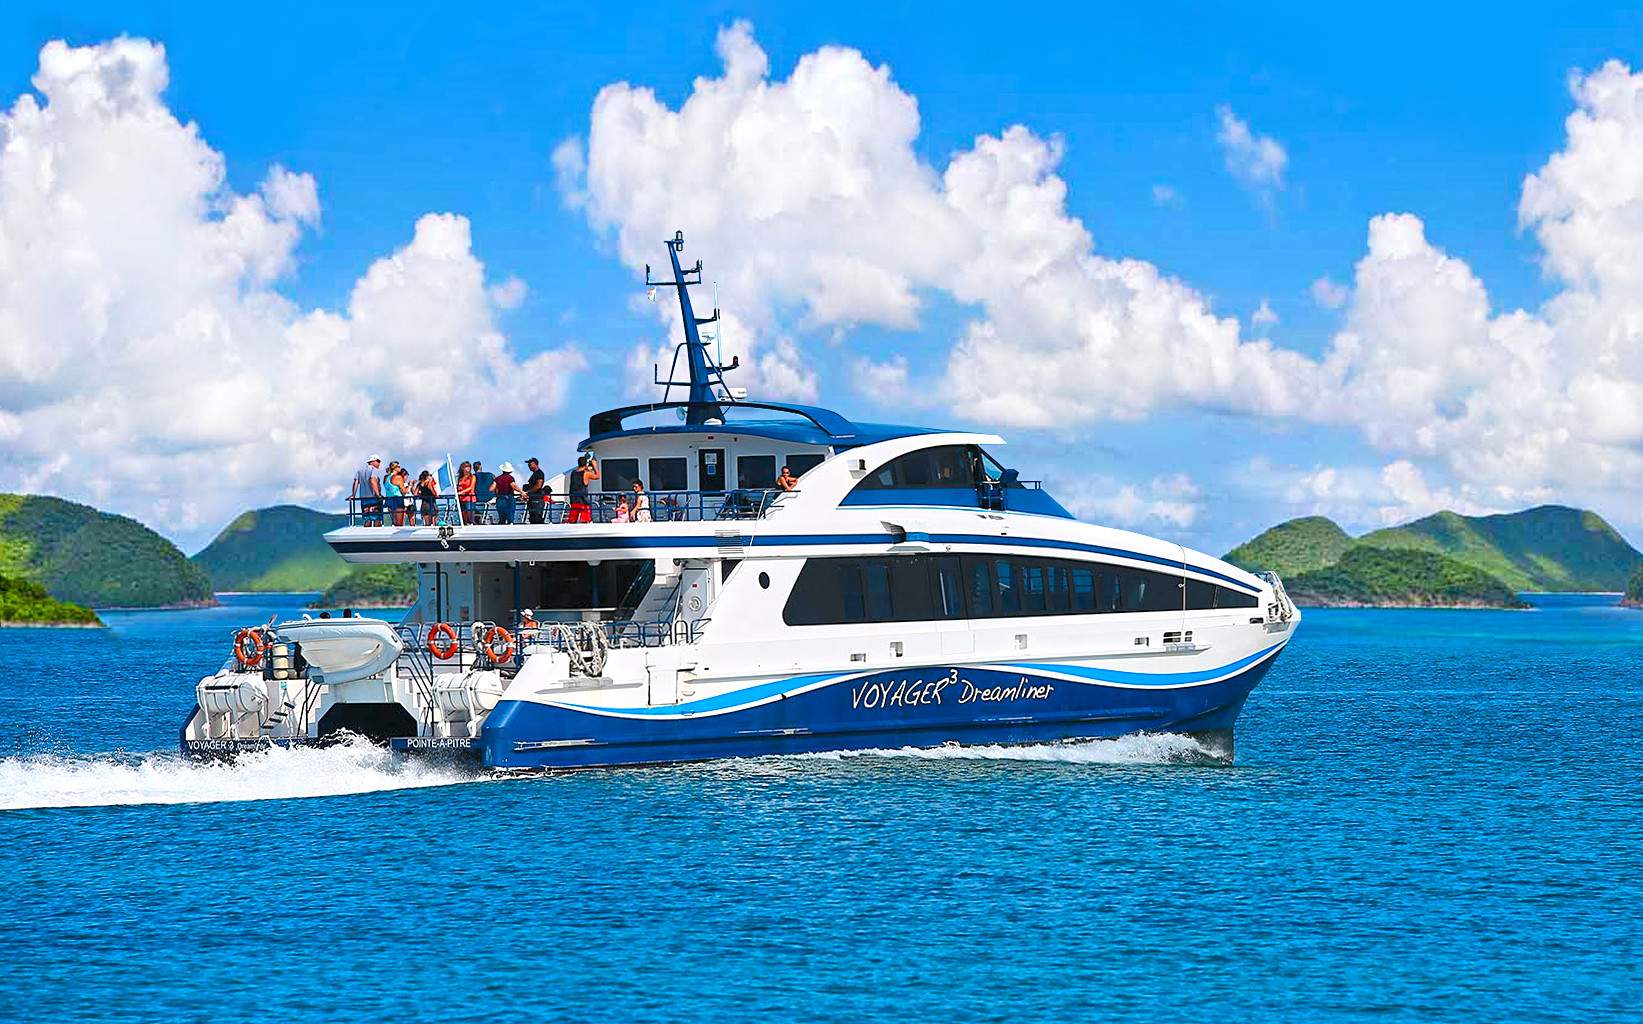 St. Barts Ferry from St. Maarten Voyager Book Online from 99